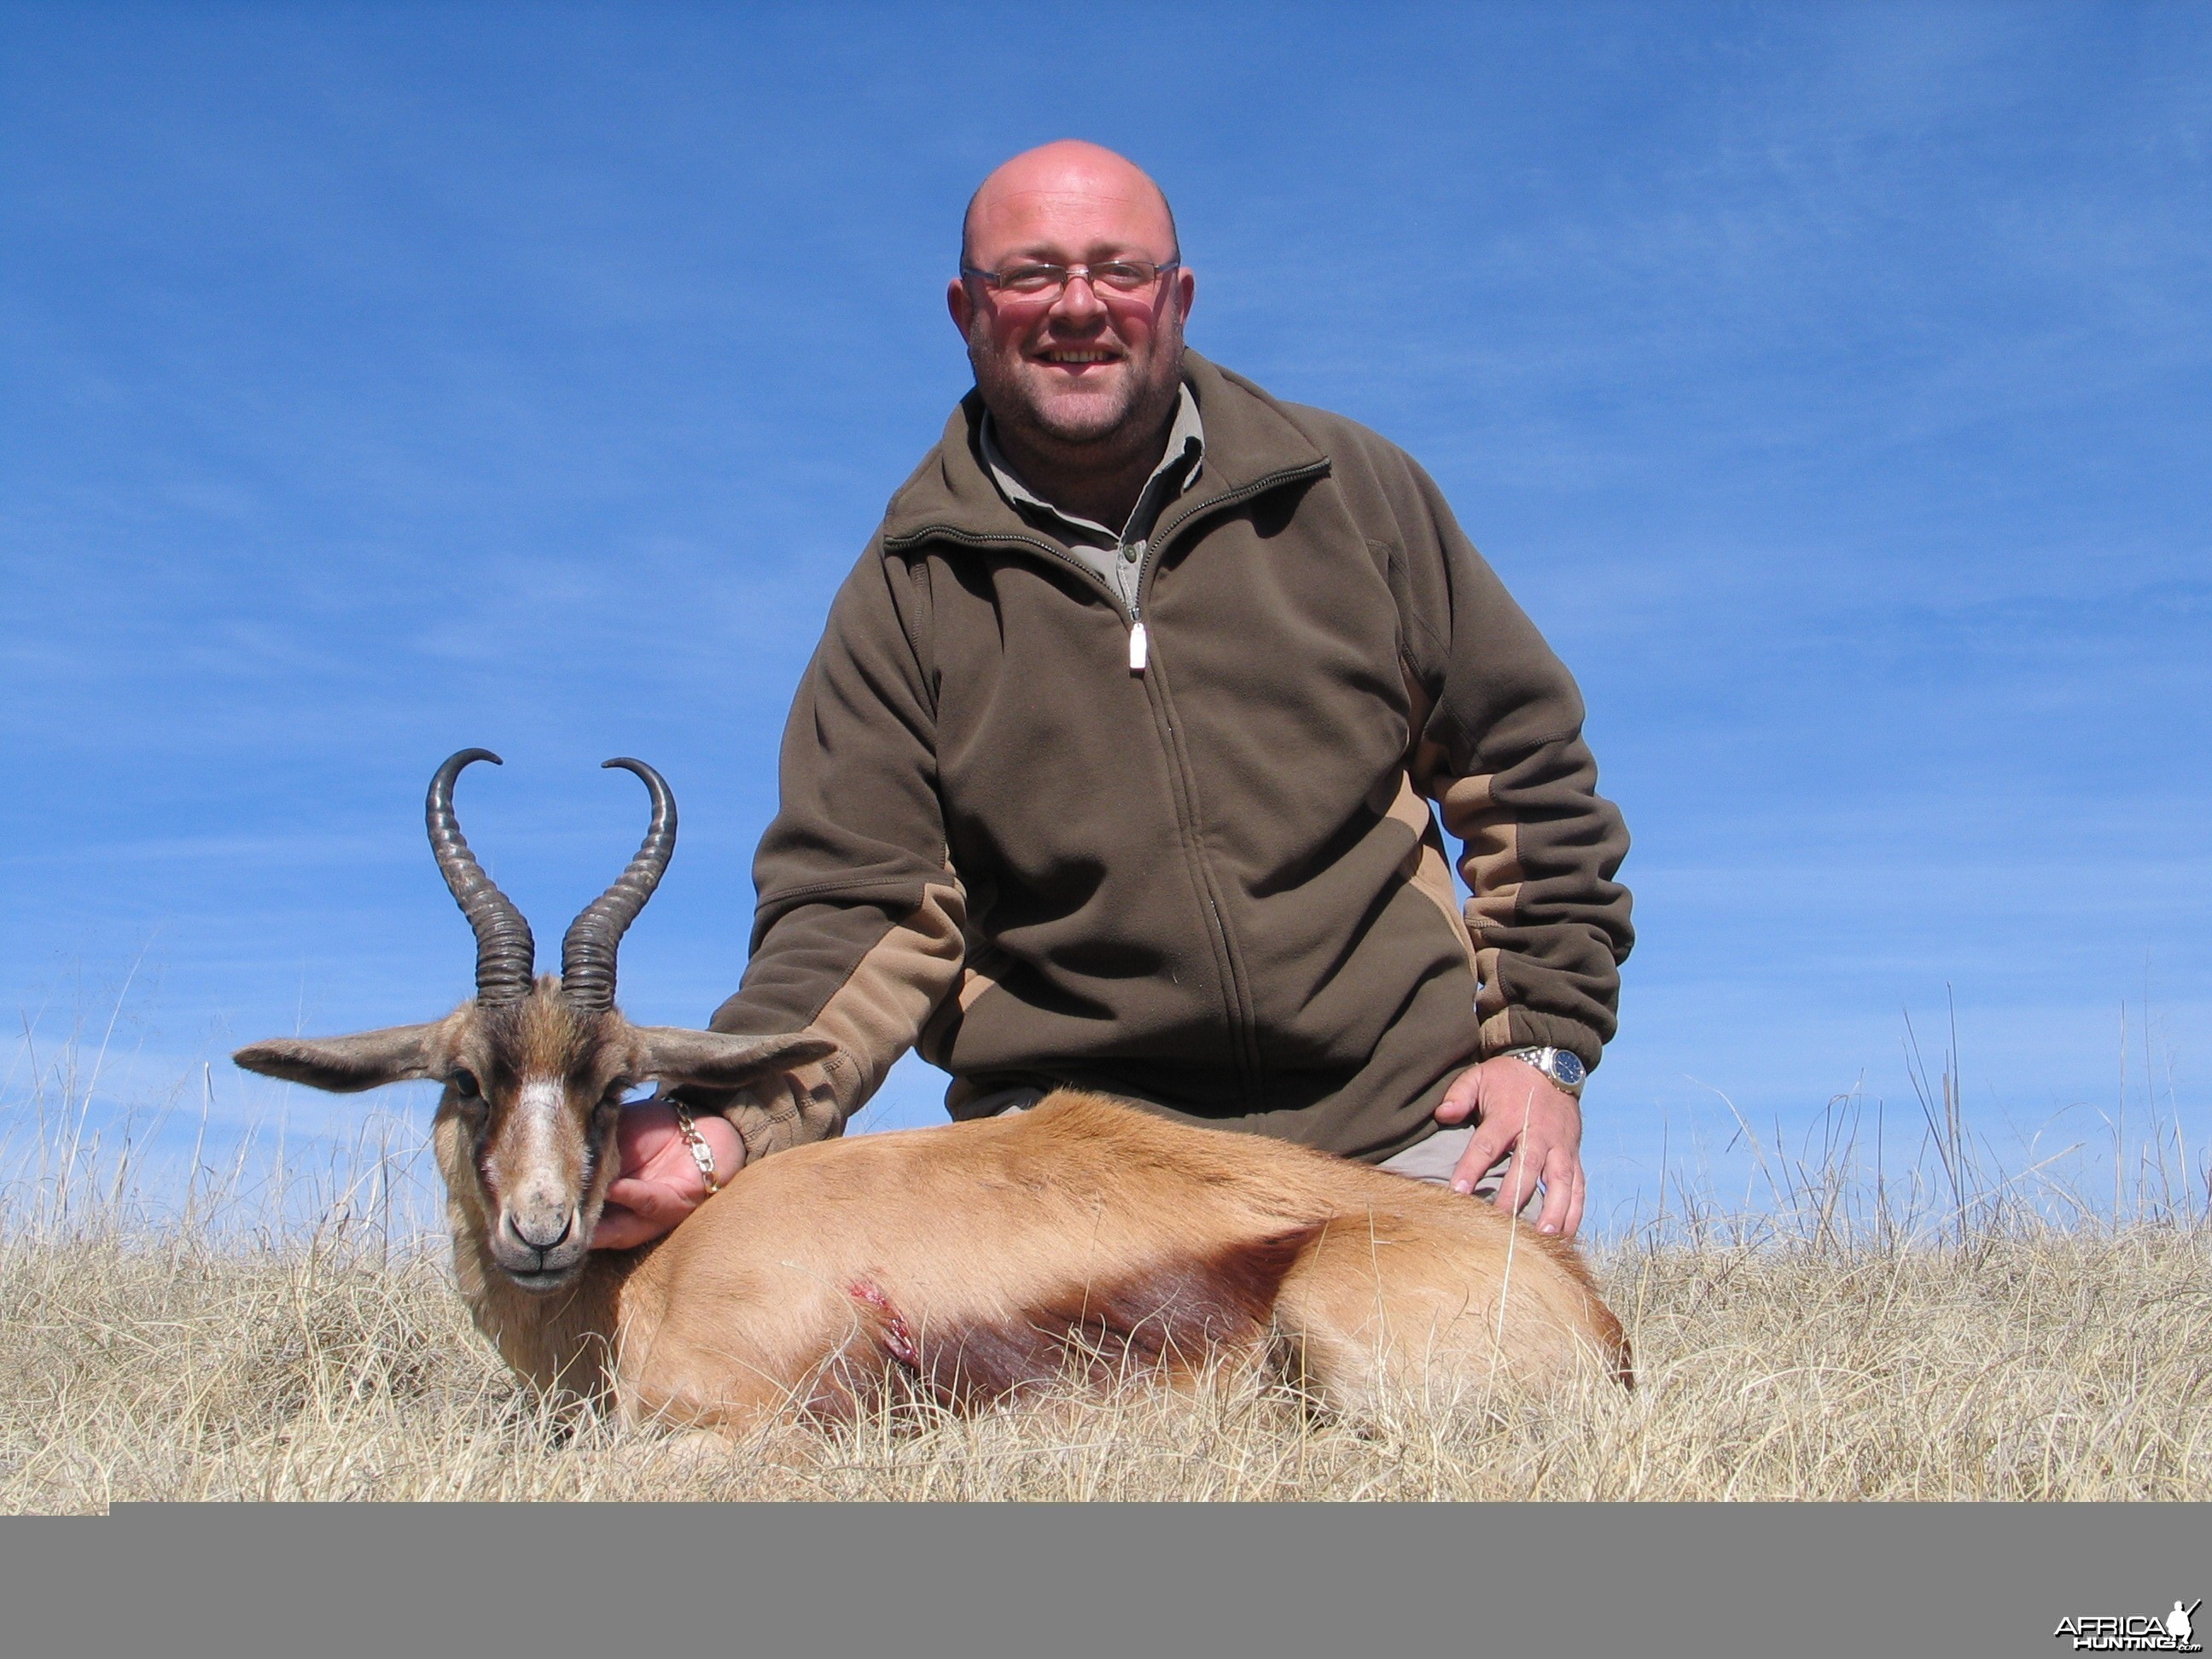 Copper Springbuck, Hunting with Clients